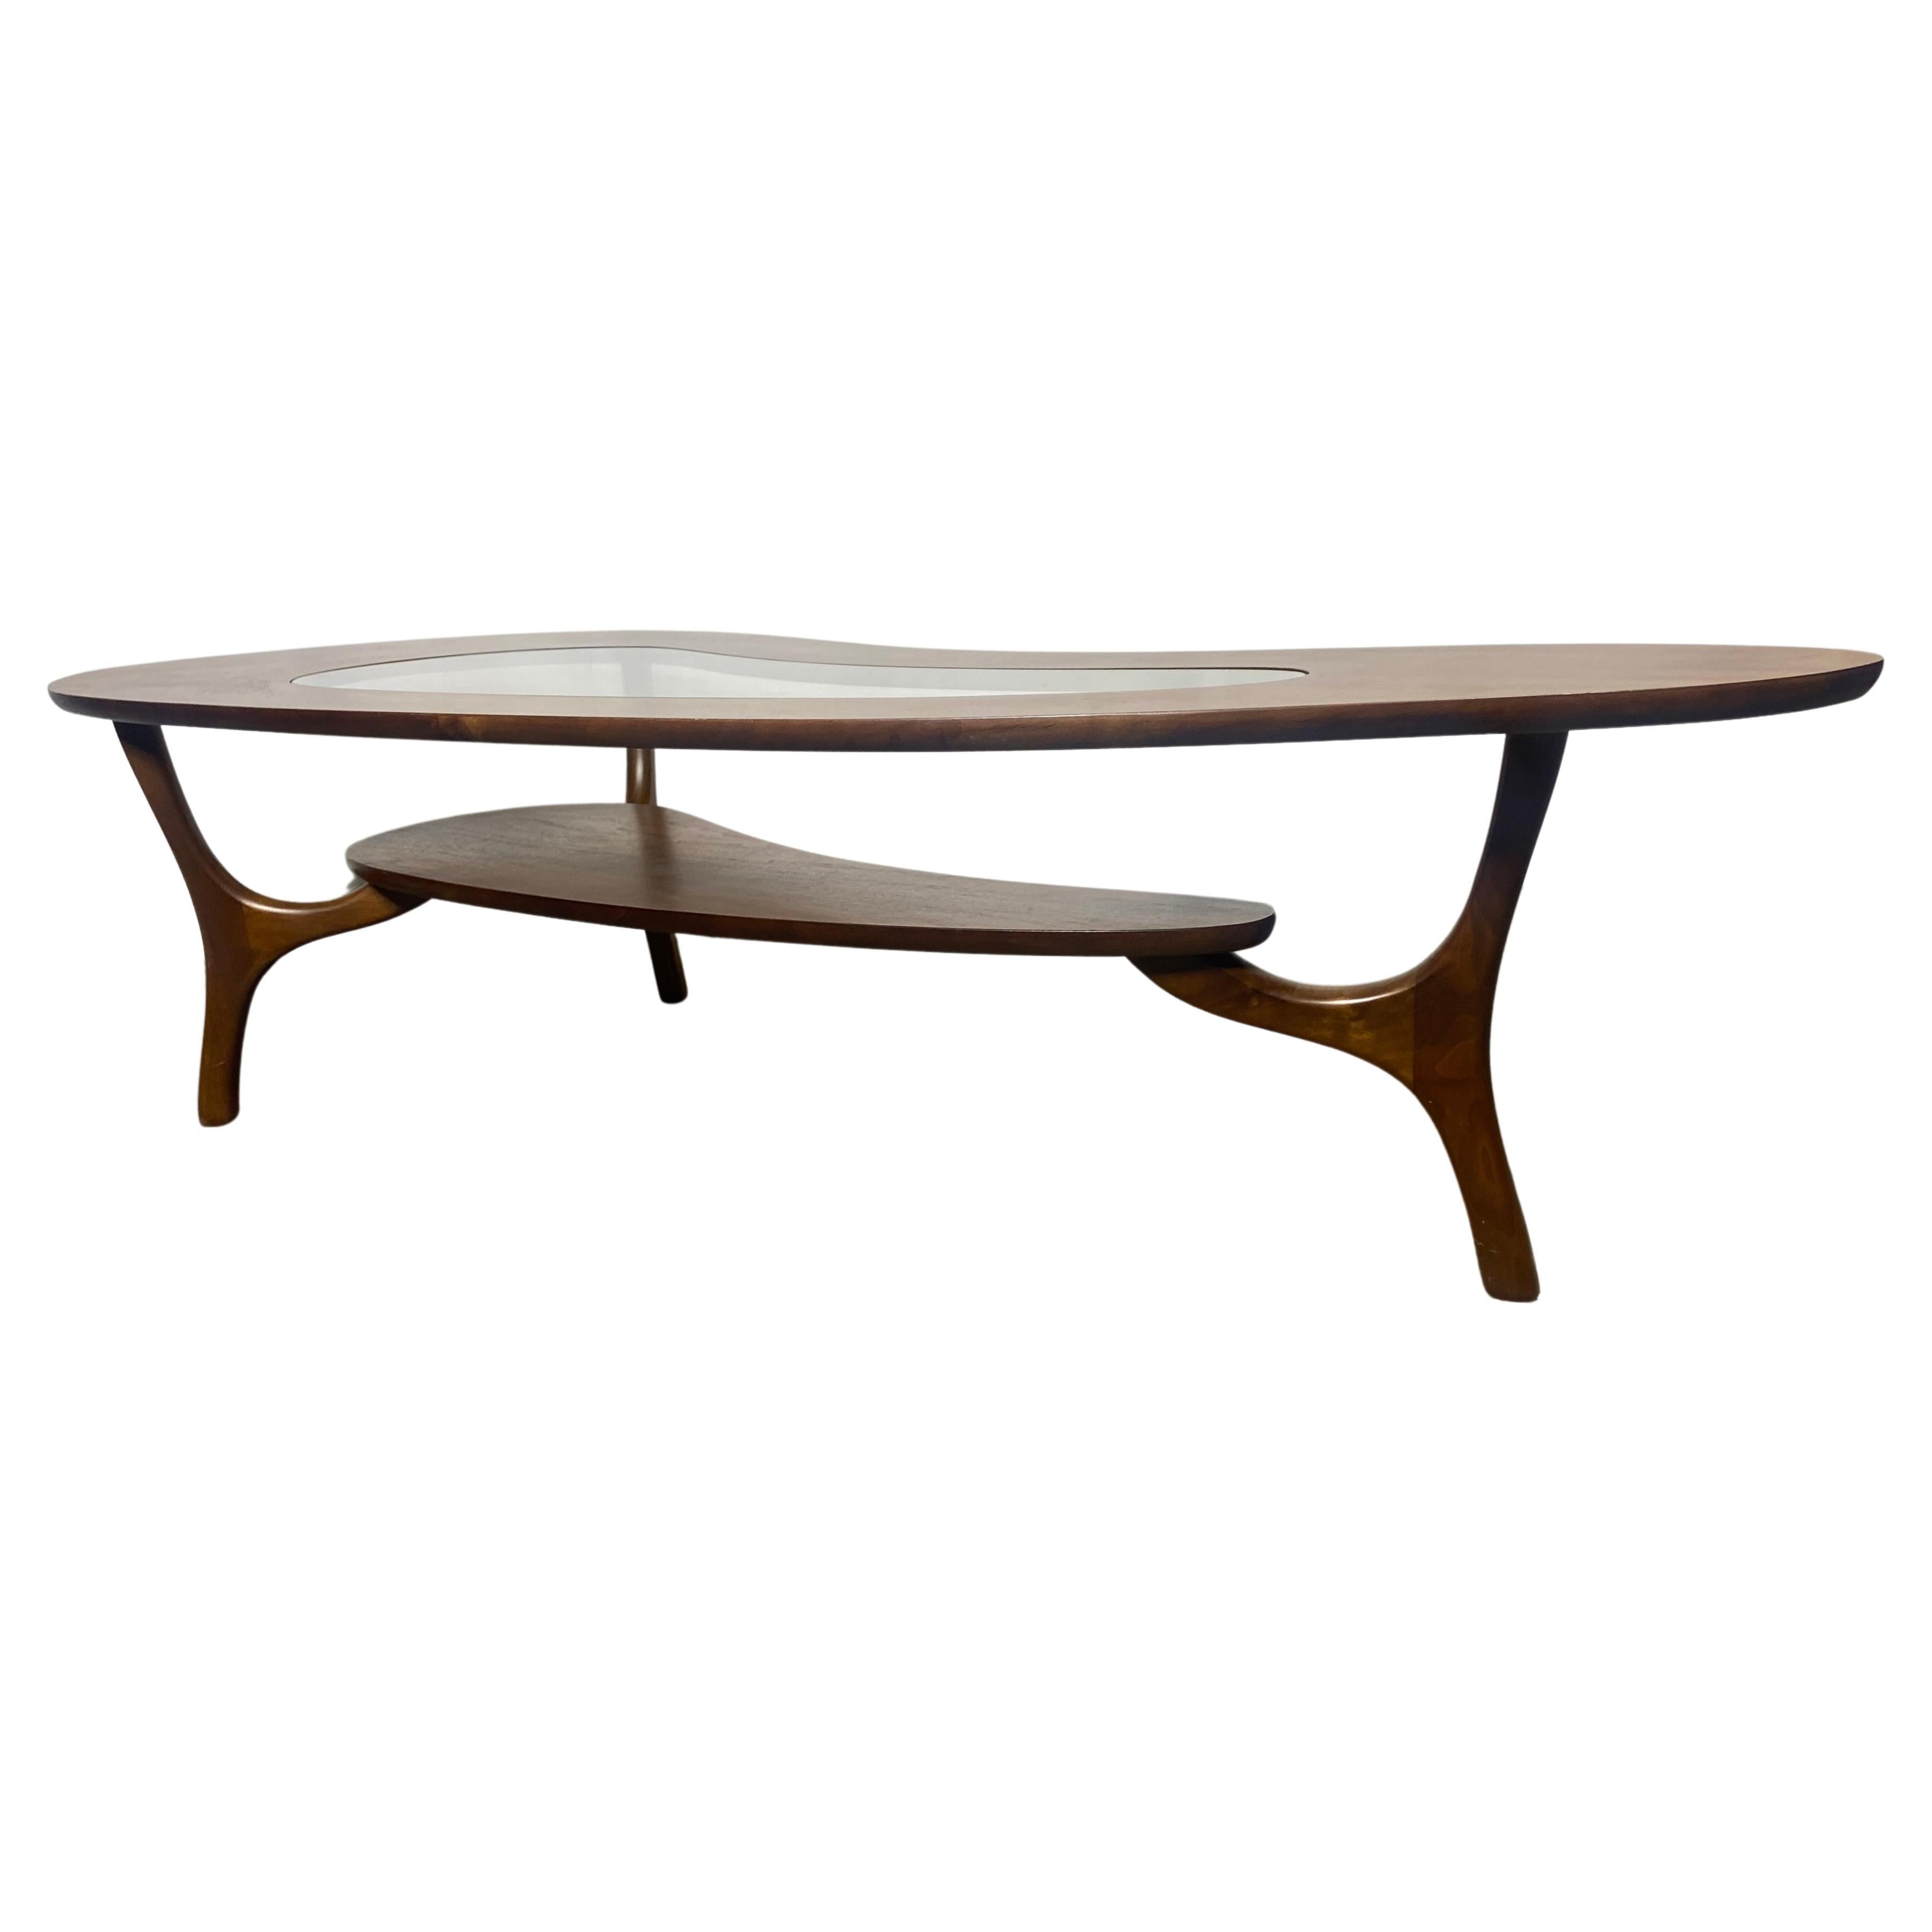 c.1960 kidney shaped, 2 tiered coffee table with sculptural legs & glass insert  For Sale